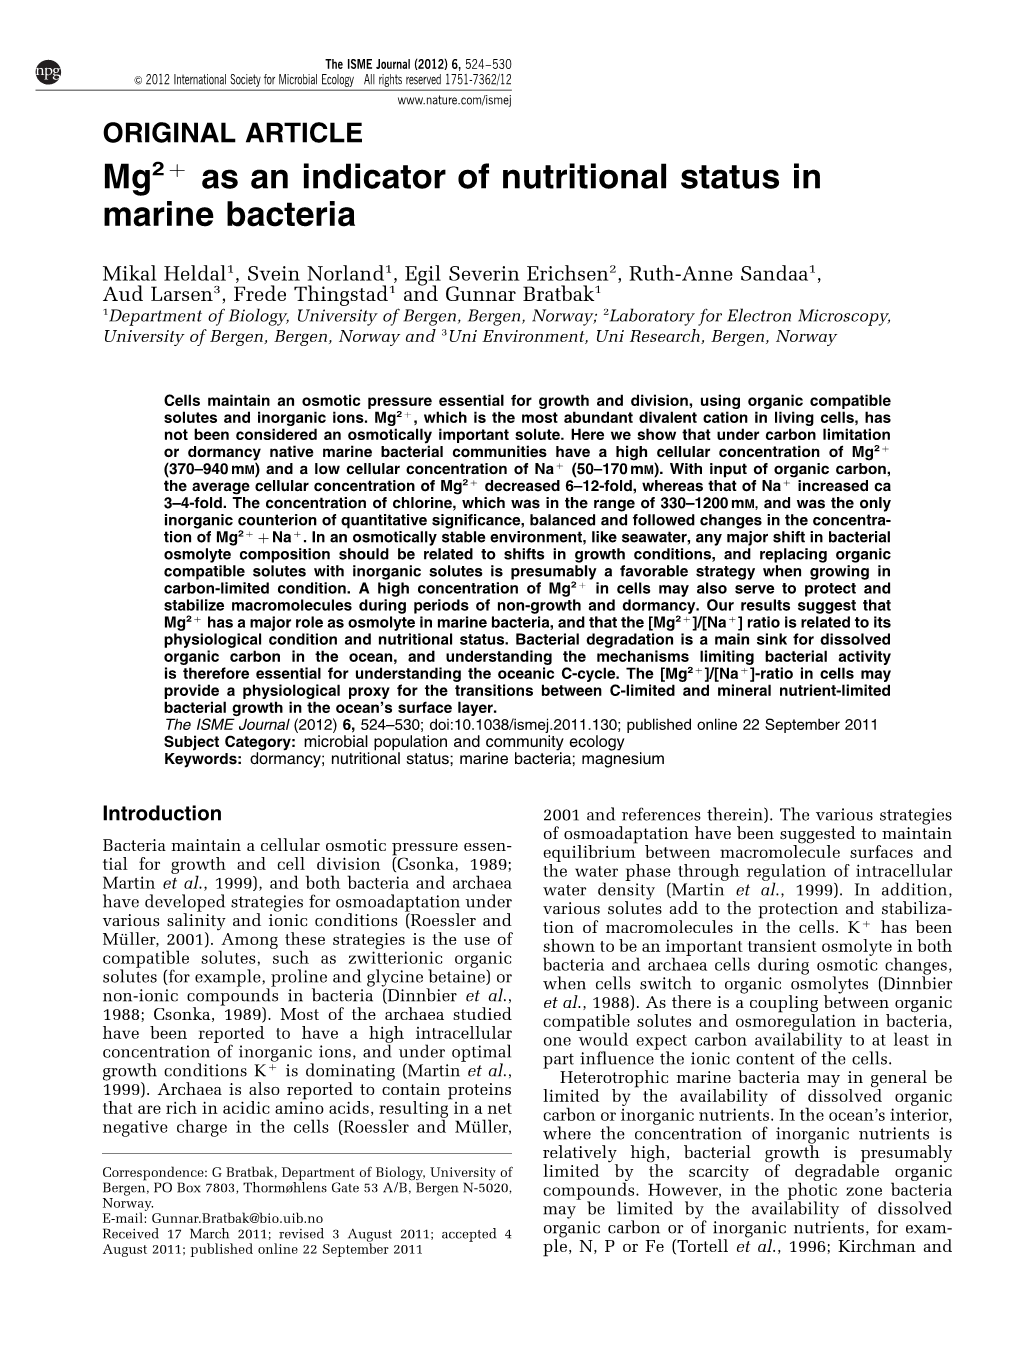 As an Indicator of Nutritional Status in Marine Bacteria